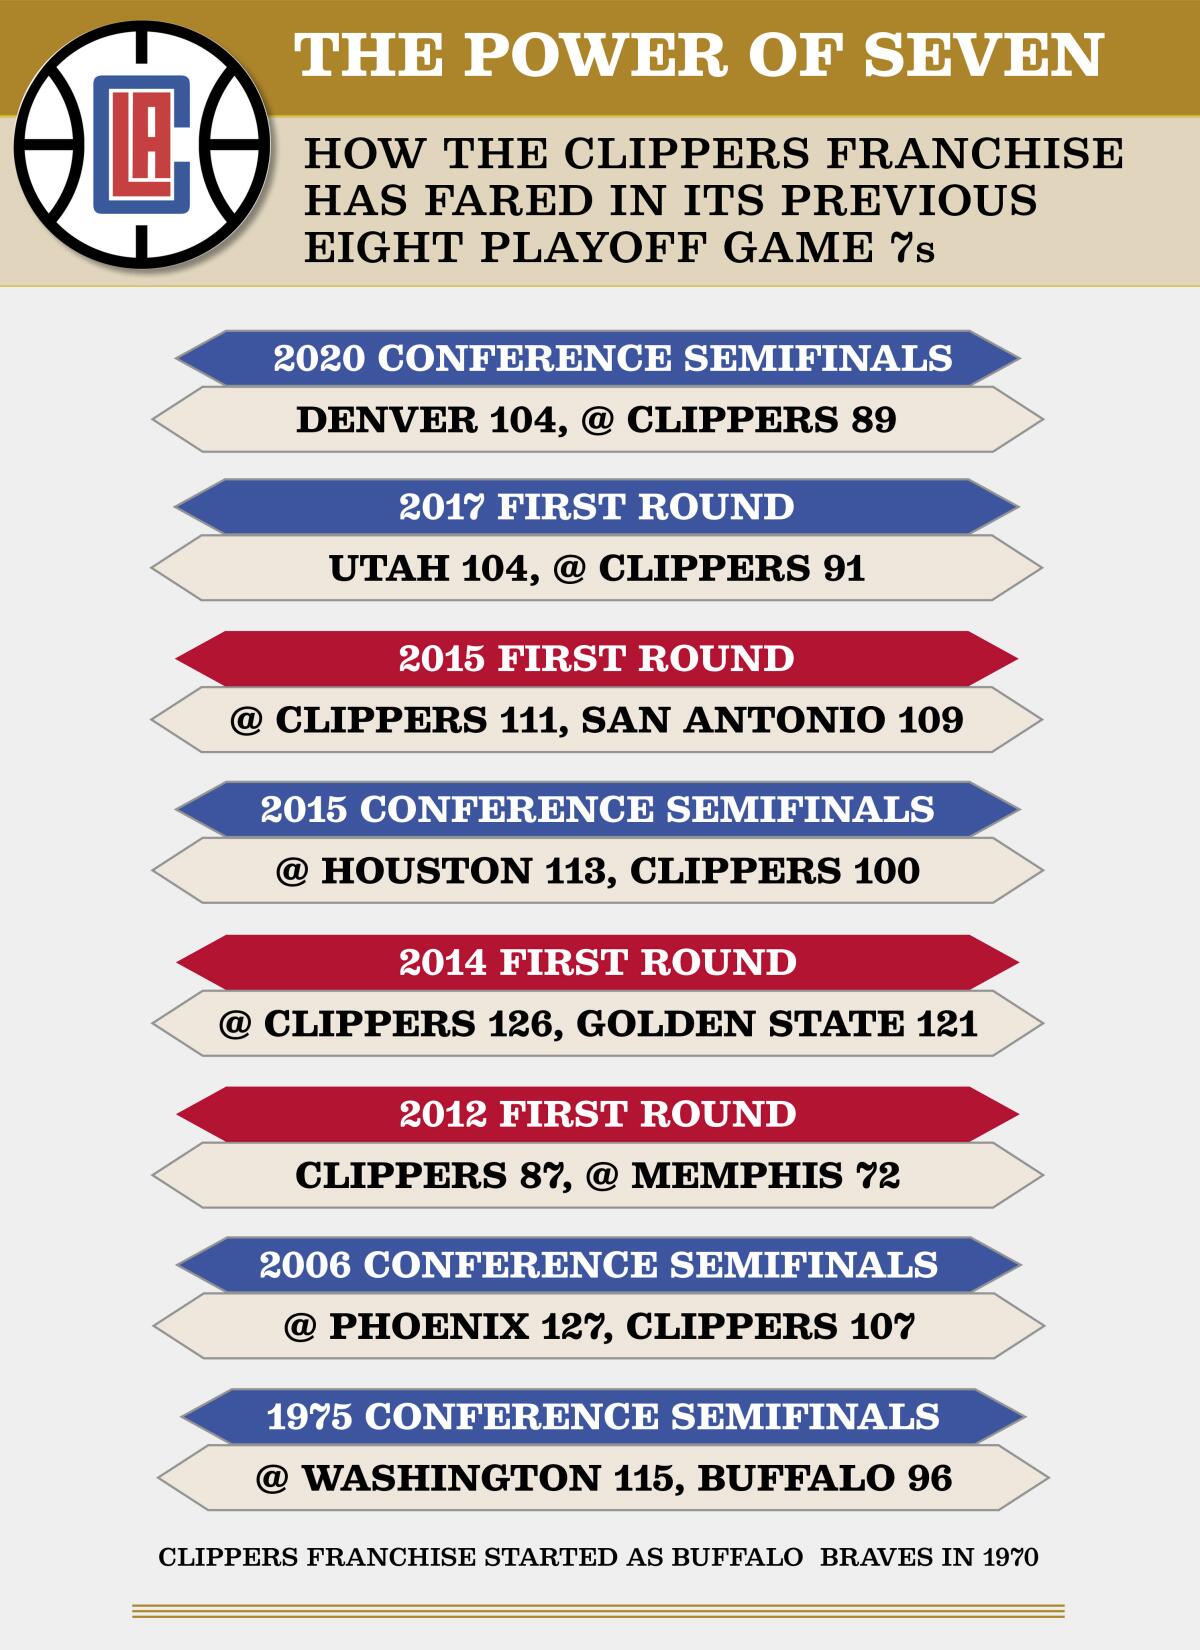 Clippers Game 7 outcomes.